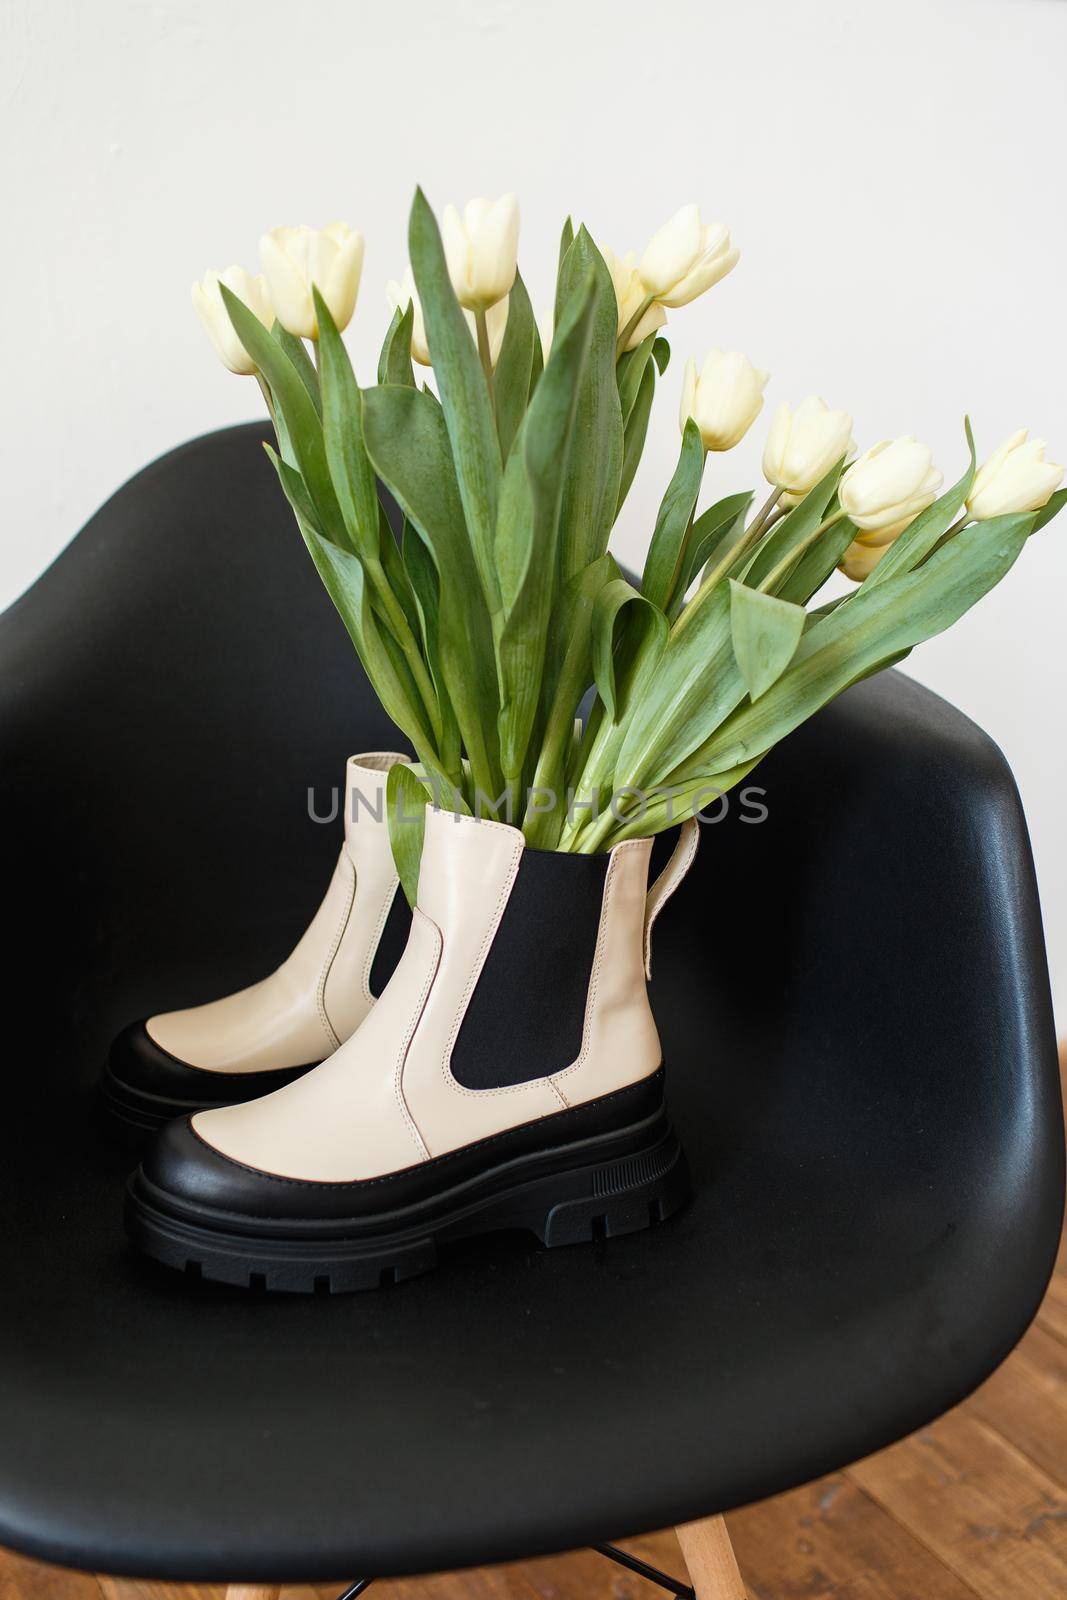 Fashionable shoes that stand on a chair. There are tulips in the shoes. Women's International Day by deandy